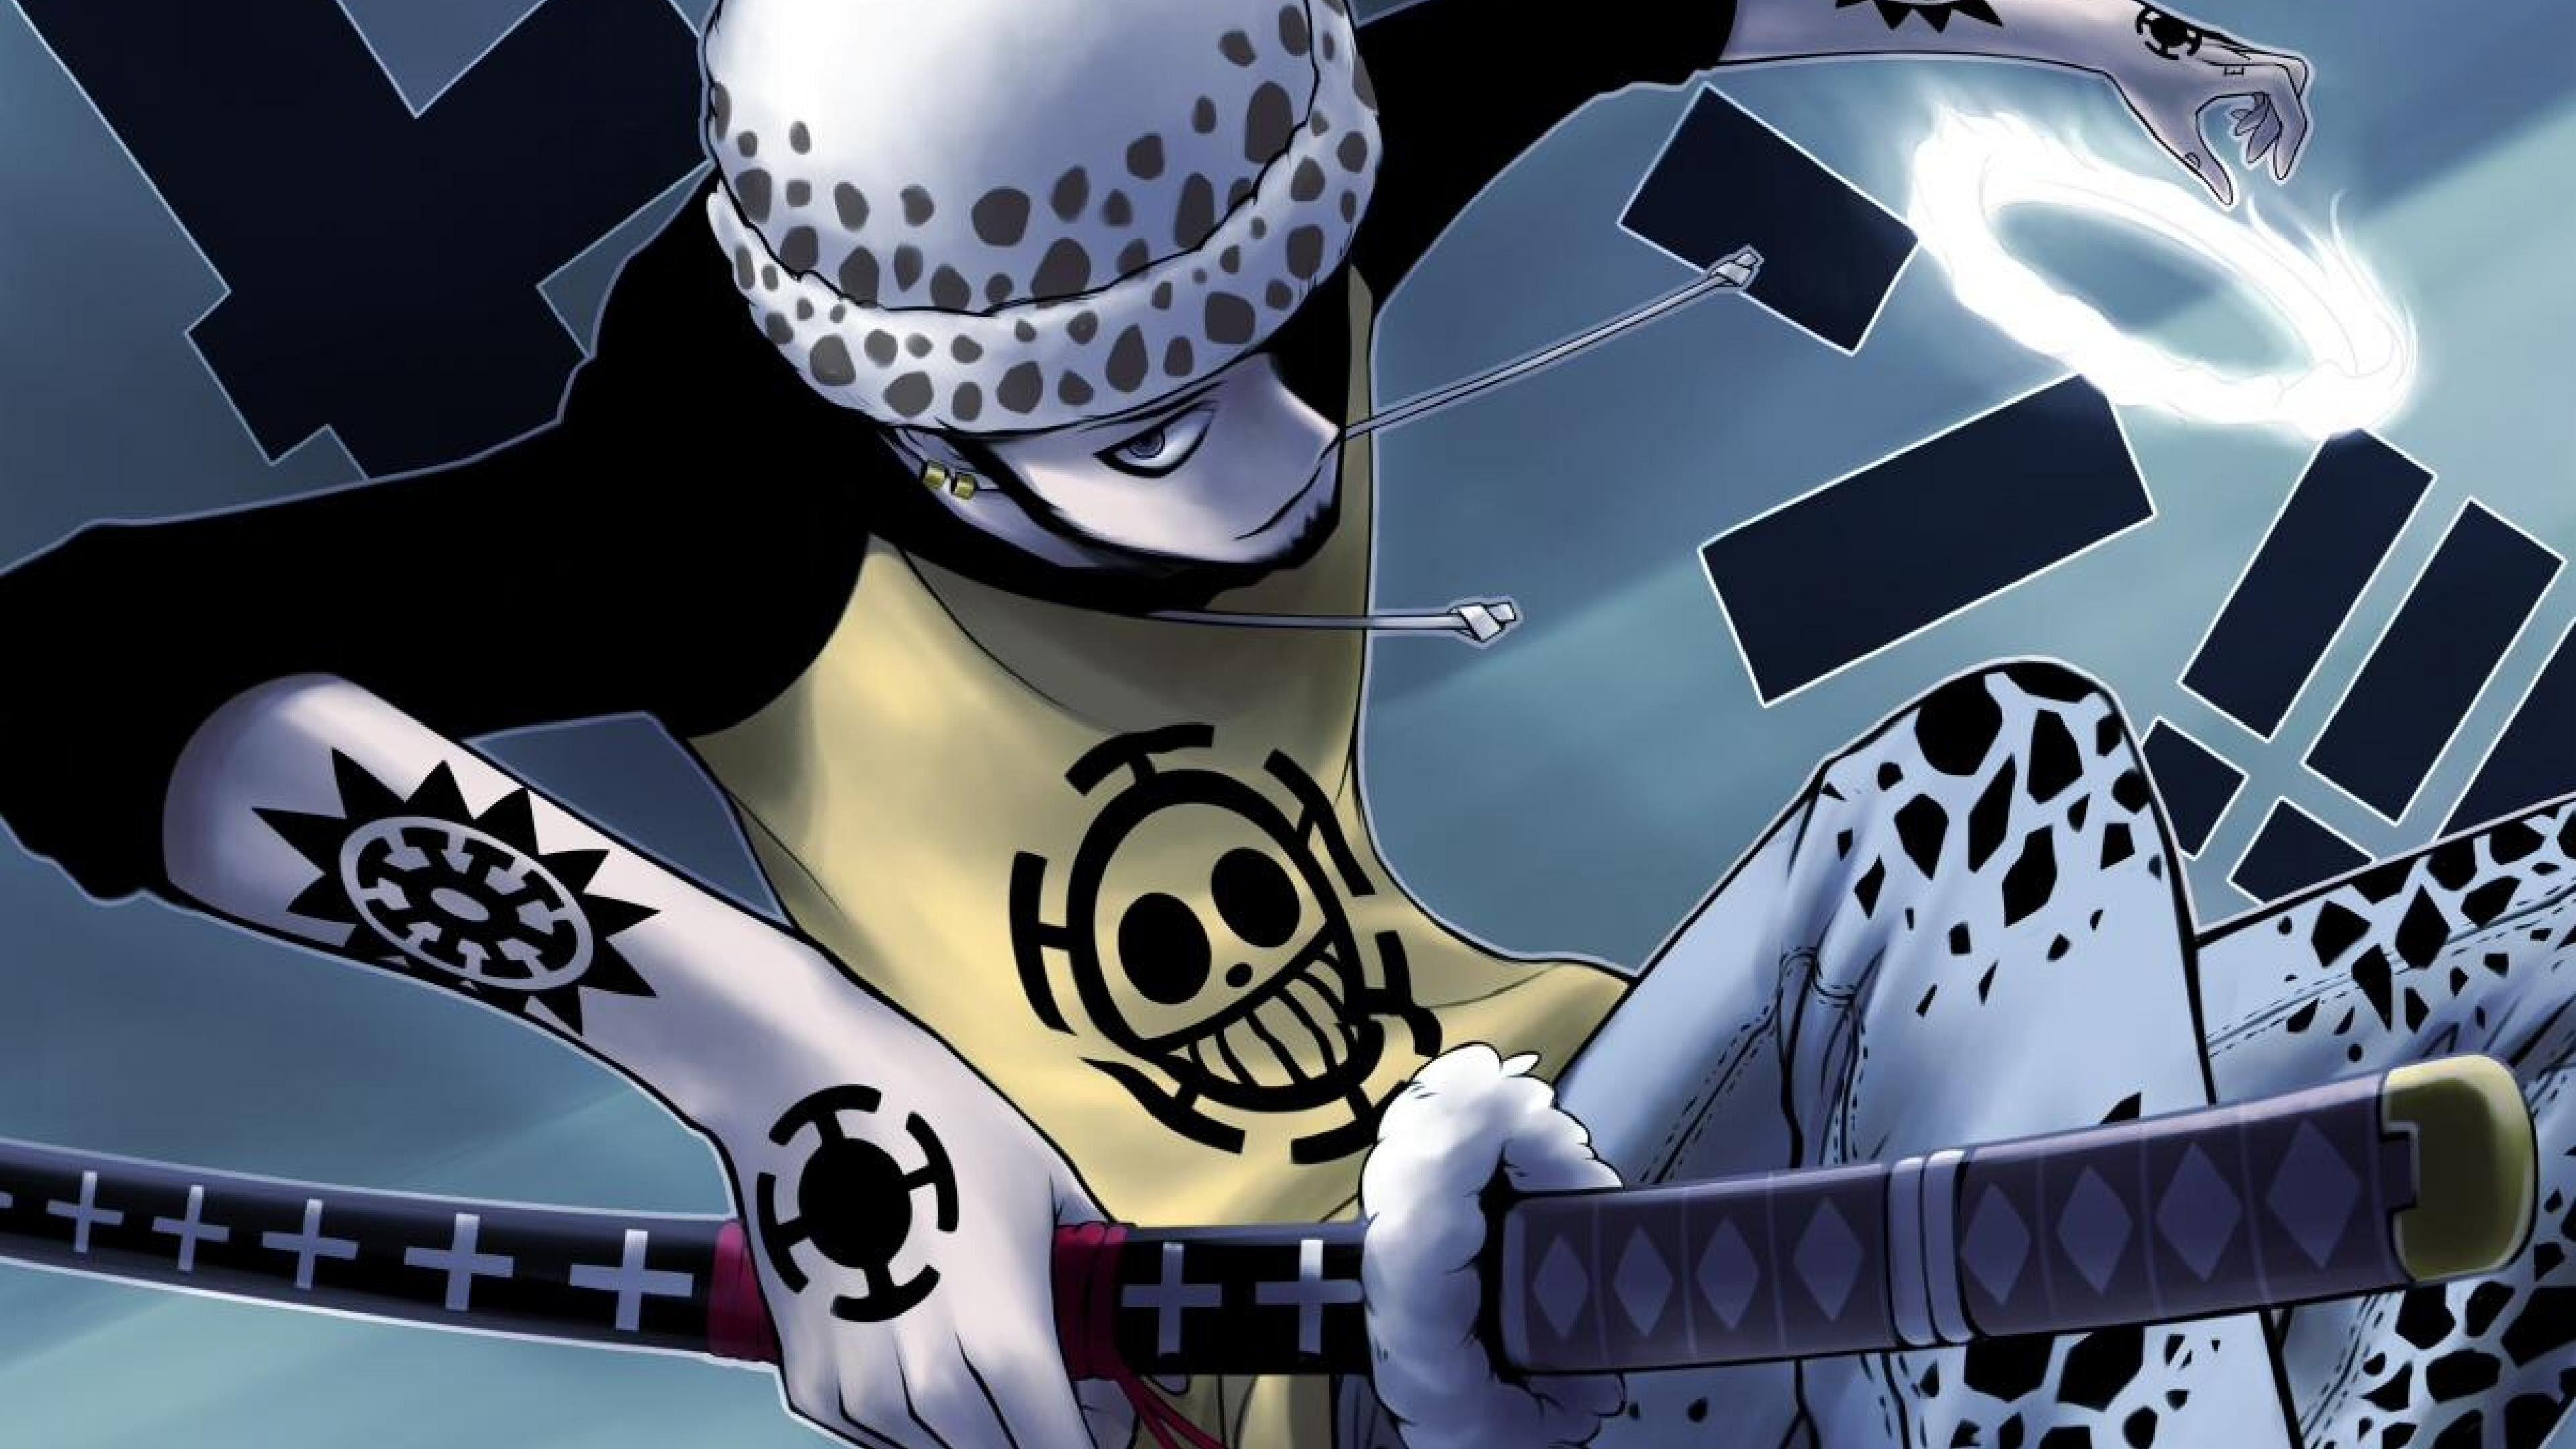 65 trafalgar law wallpapers images in full hd, 2k and 4k sizes. 